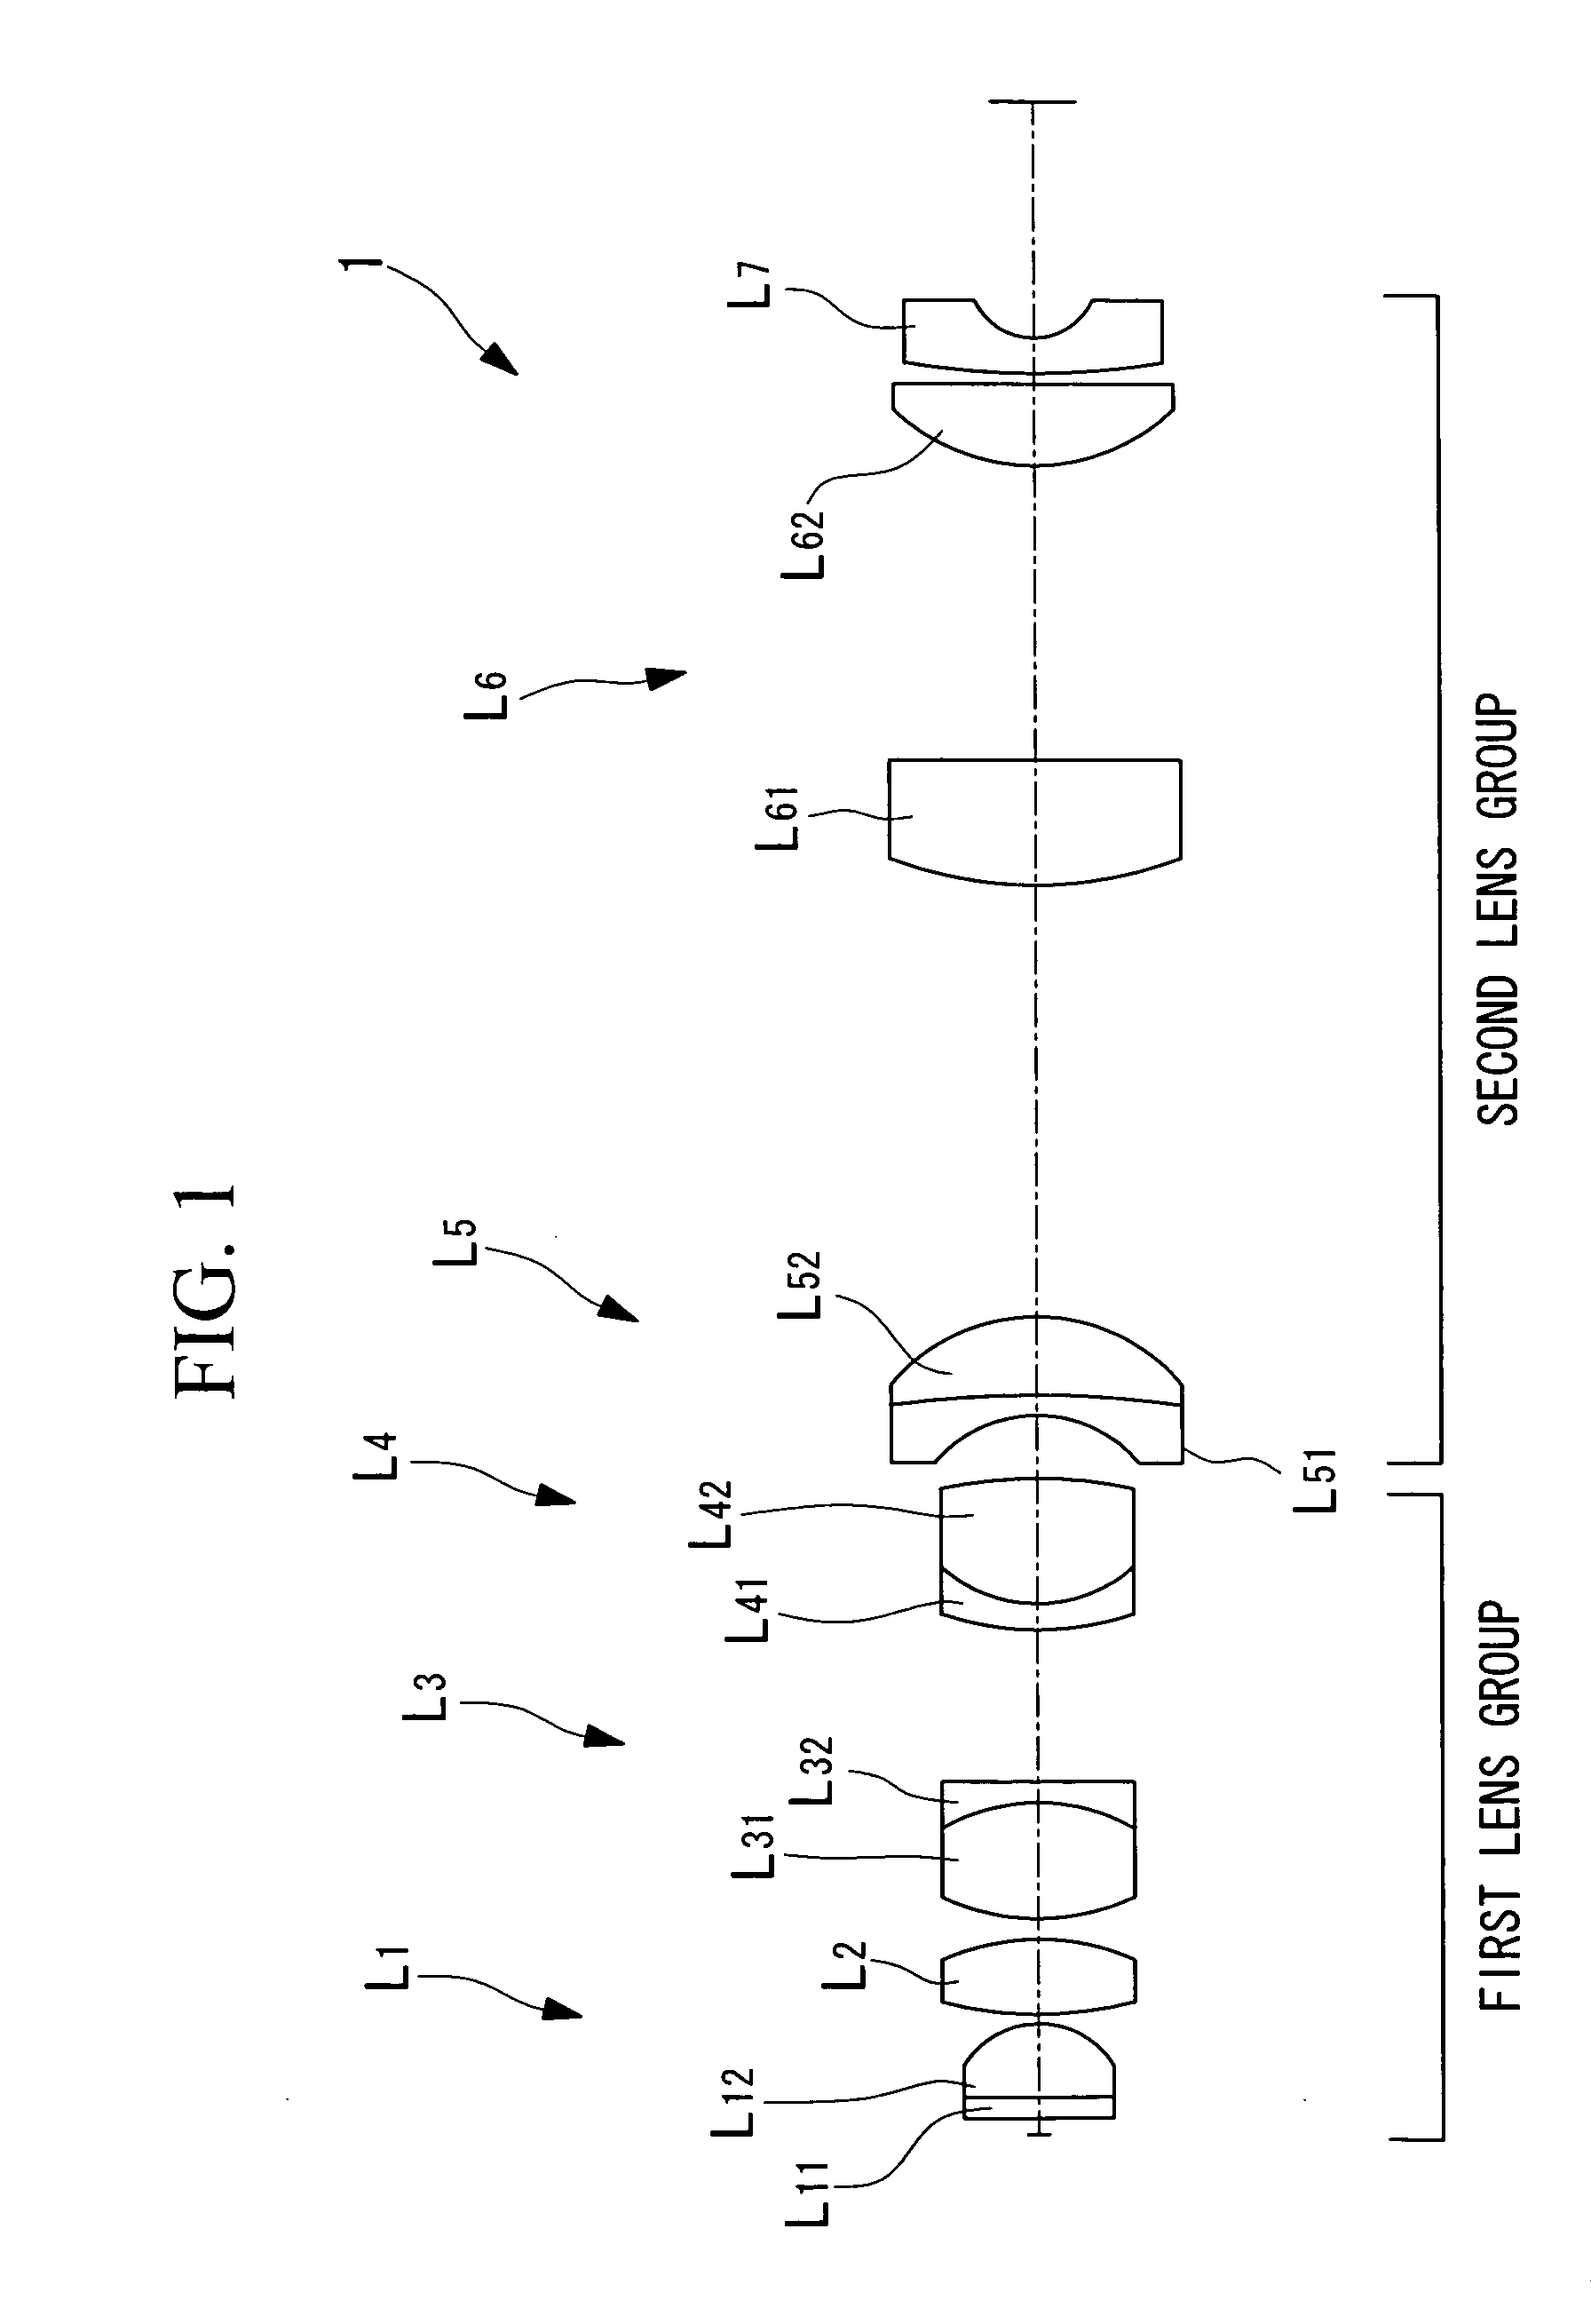 Liquid-immersion objective optical system